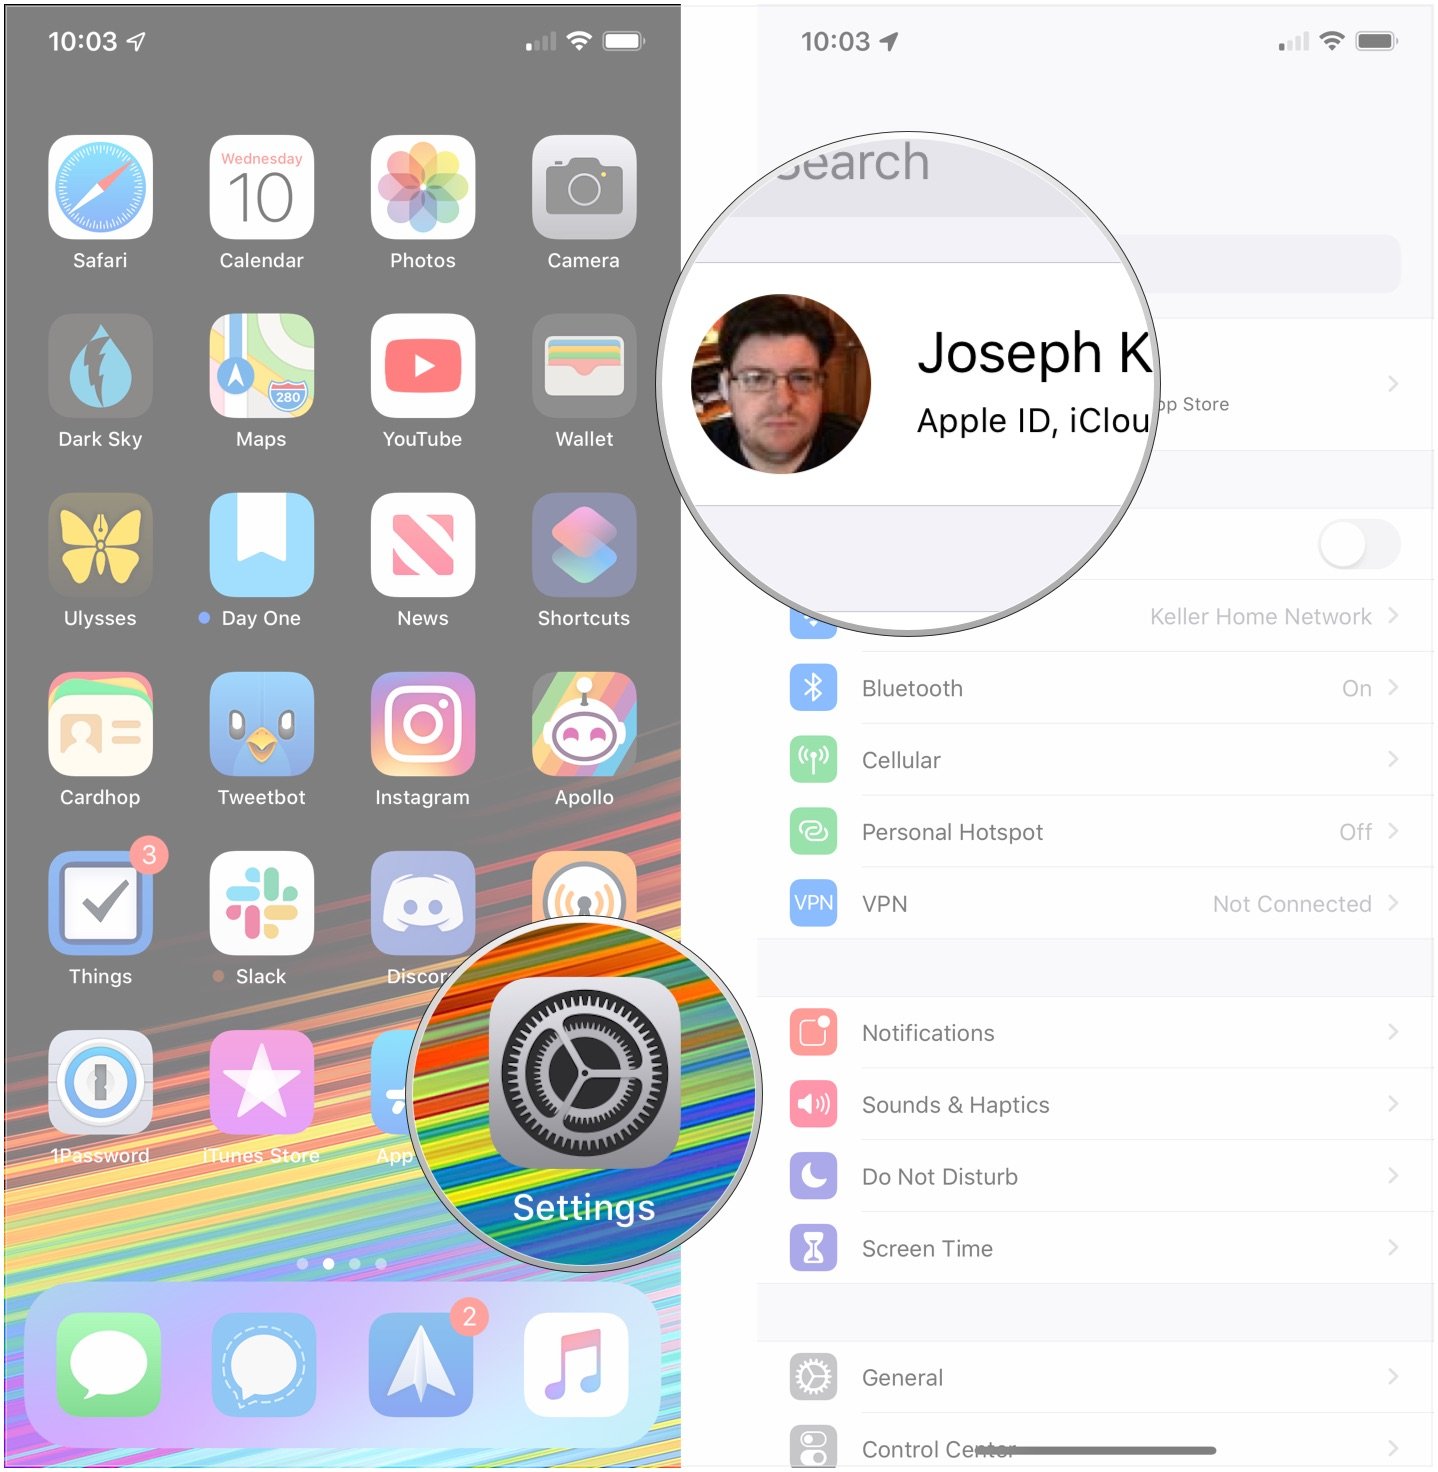 Open Messages, tap Apple ID banner